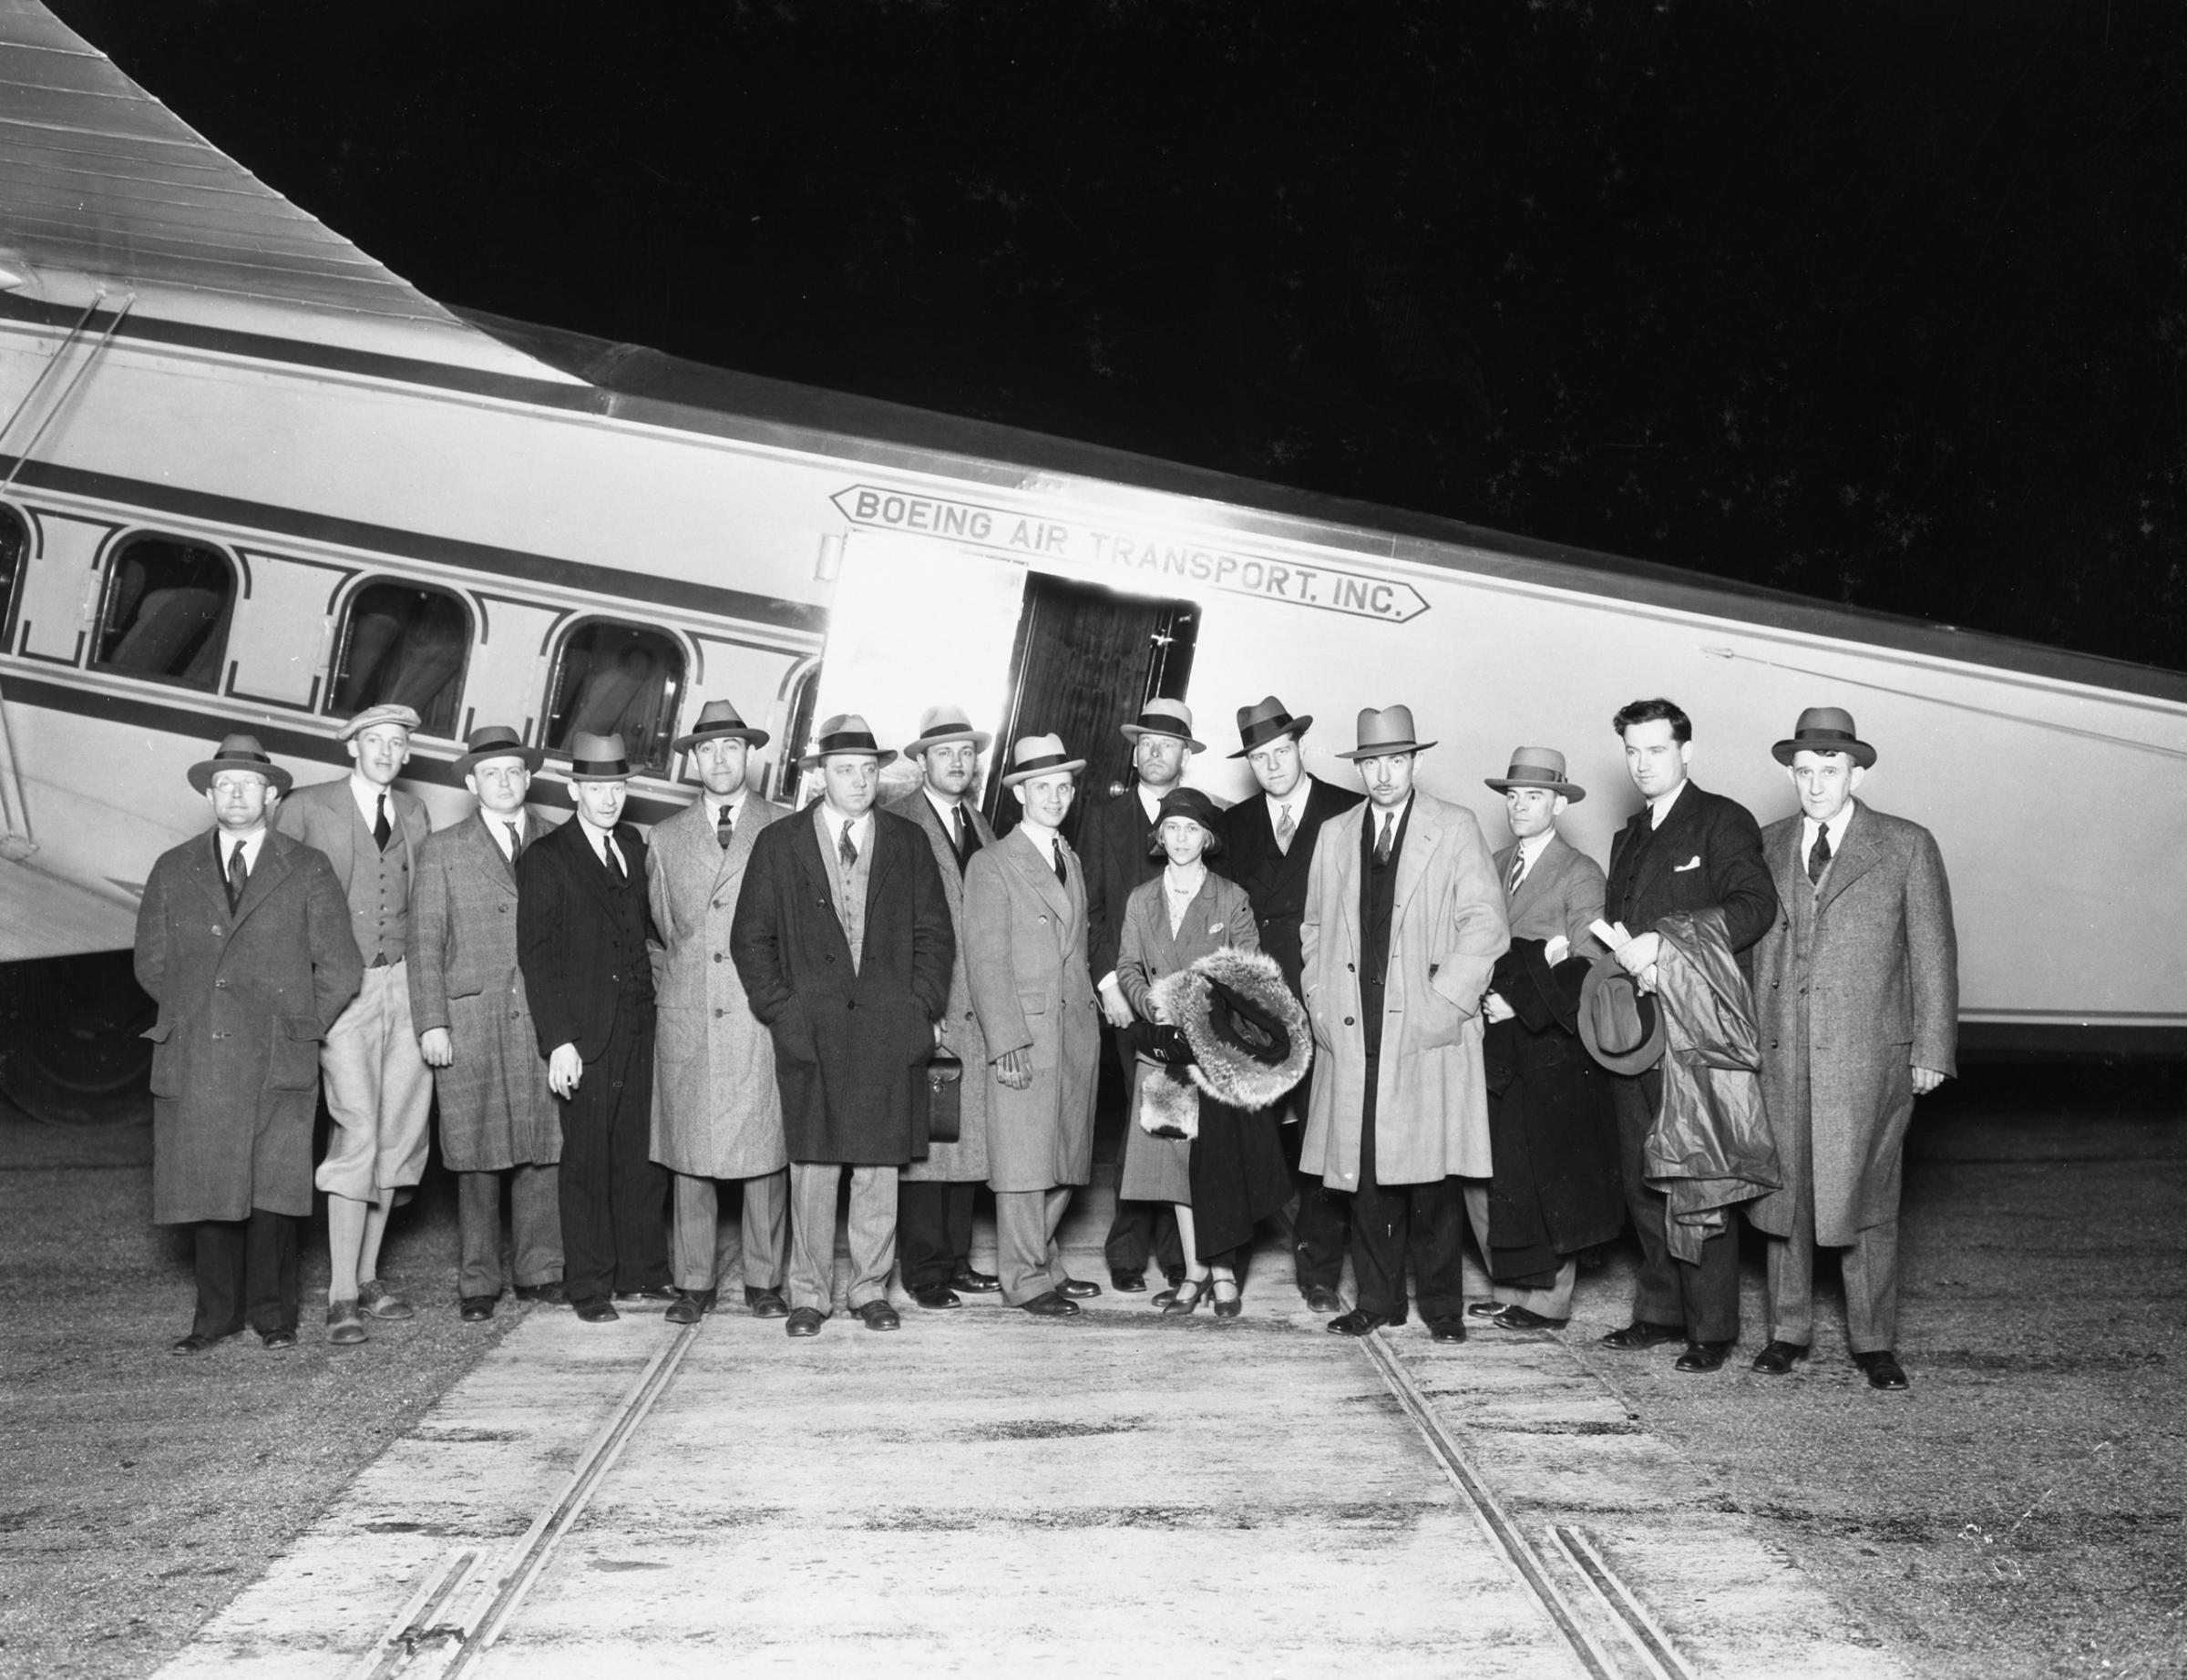 Passengers pose in front of the Model 80, built by Boeing Air Transport.